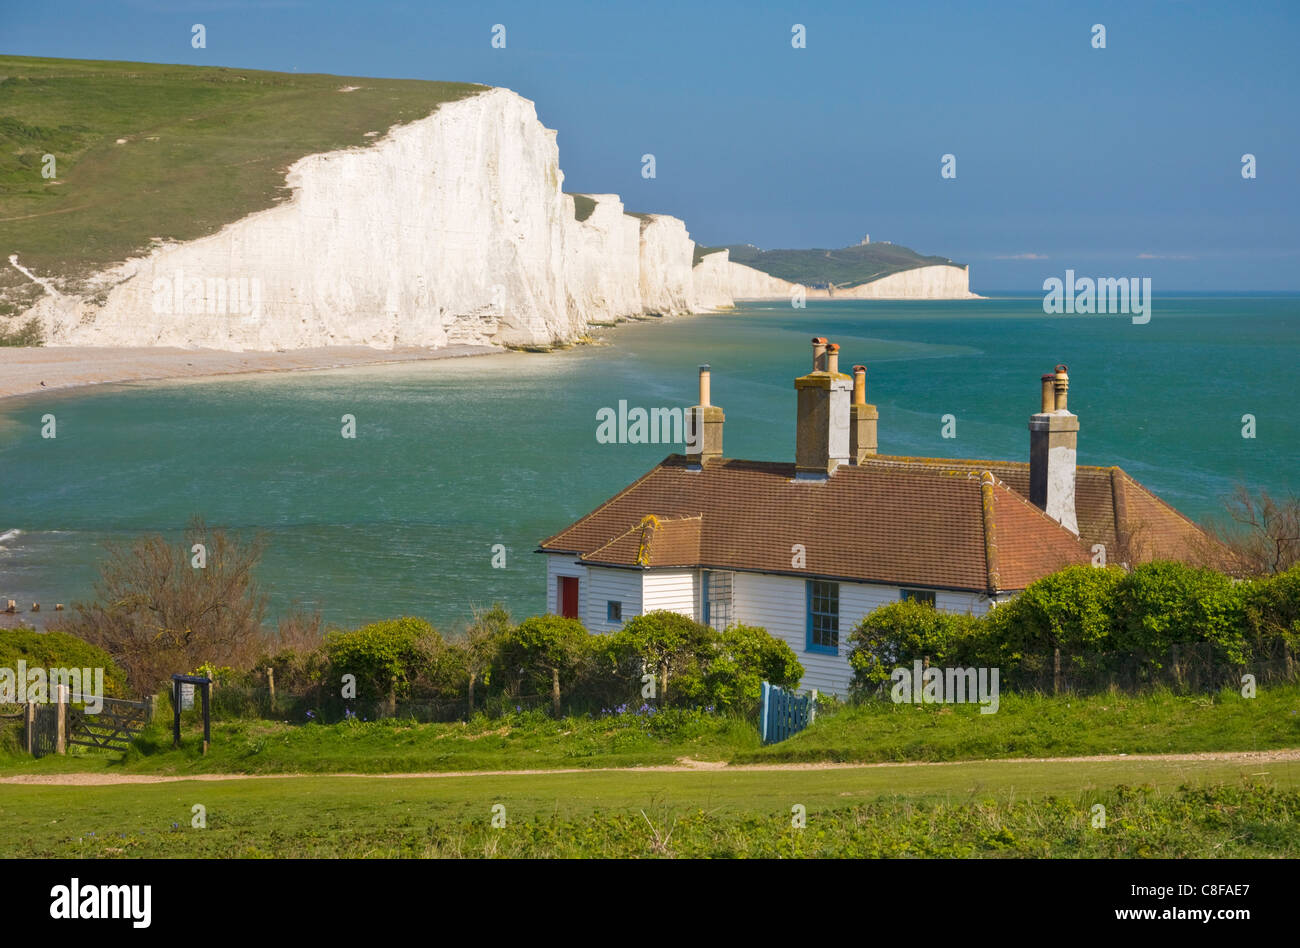 Sette sorelle scogliere, Coastguard Cottages Seaford Testa, South Downs Way, South Downs National Park, East Sussex, England, Regno Unito Foto Stock